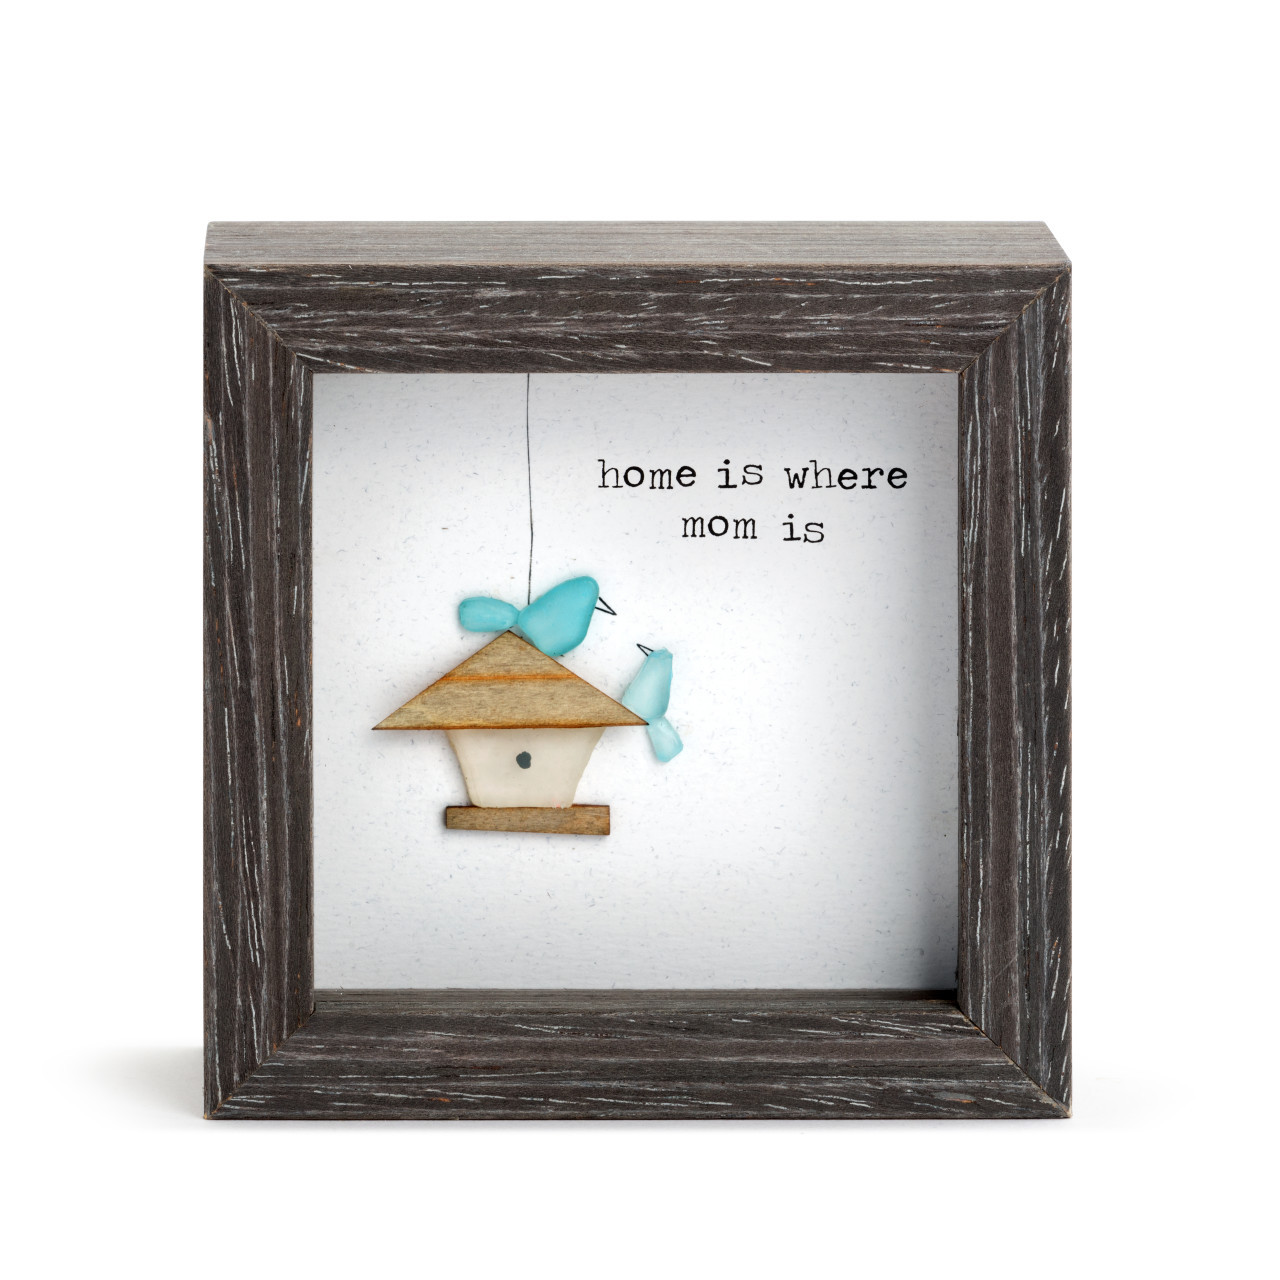 Home Is Where Mom Is - Sharon Nowlan Shadow Box - 4 x 4 in - Mellow Monkey